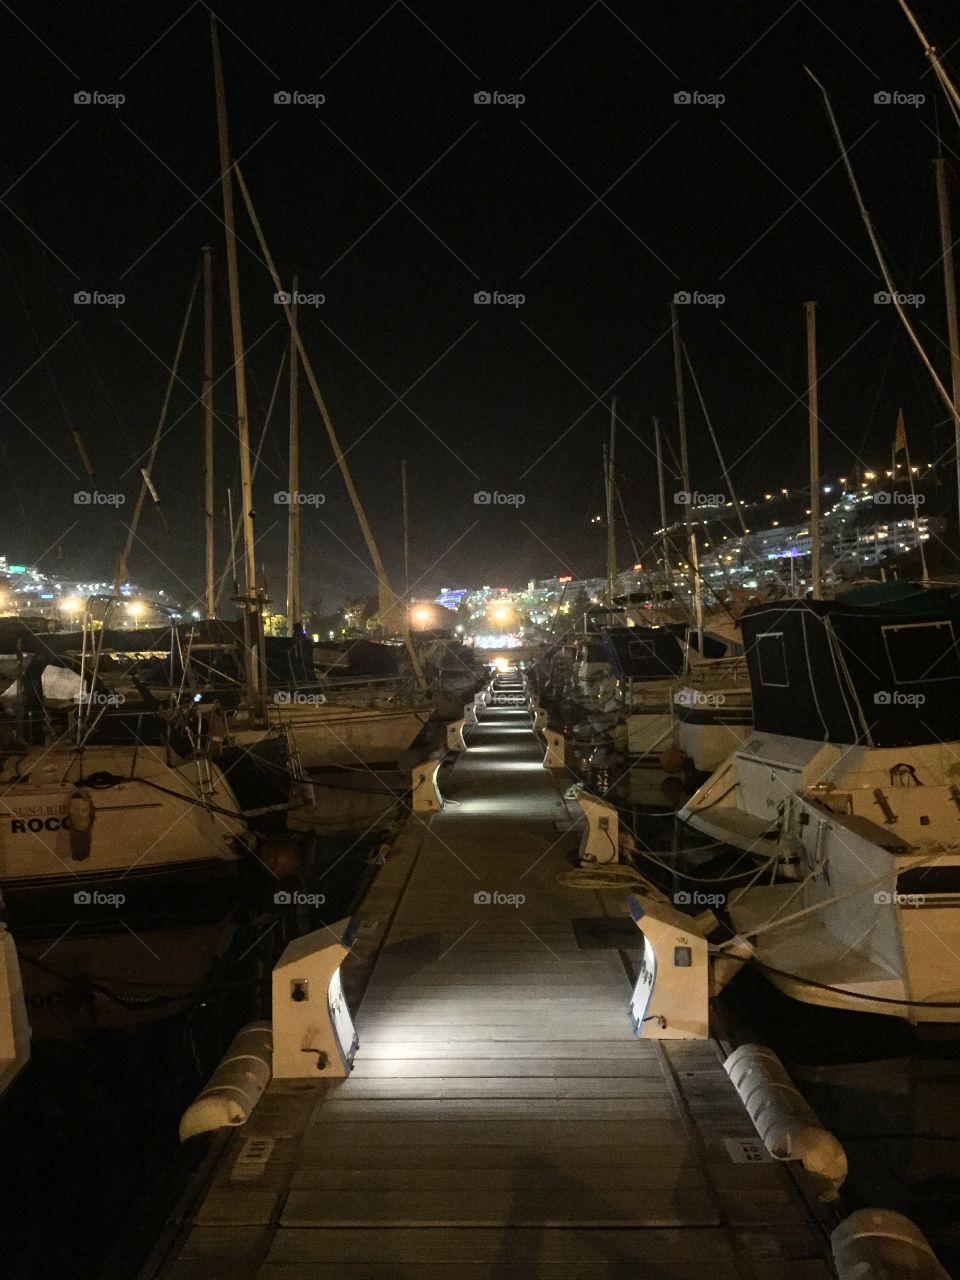 The  beautiful boats at night in the harbor